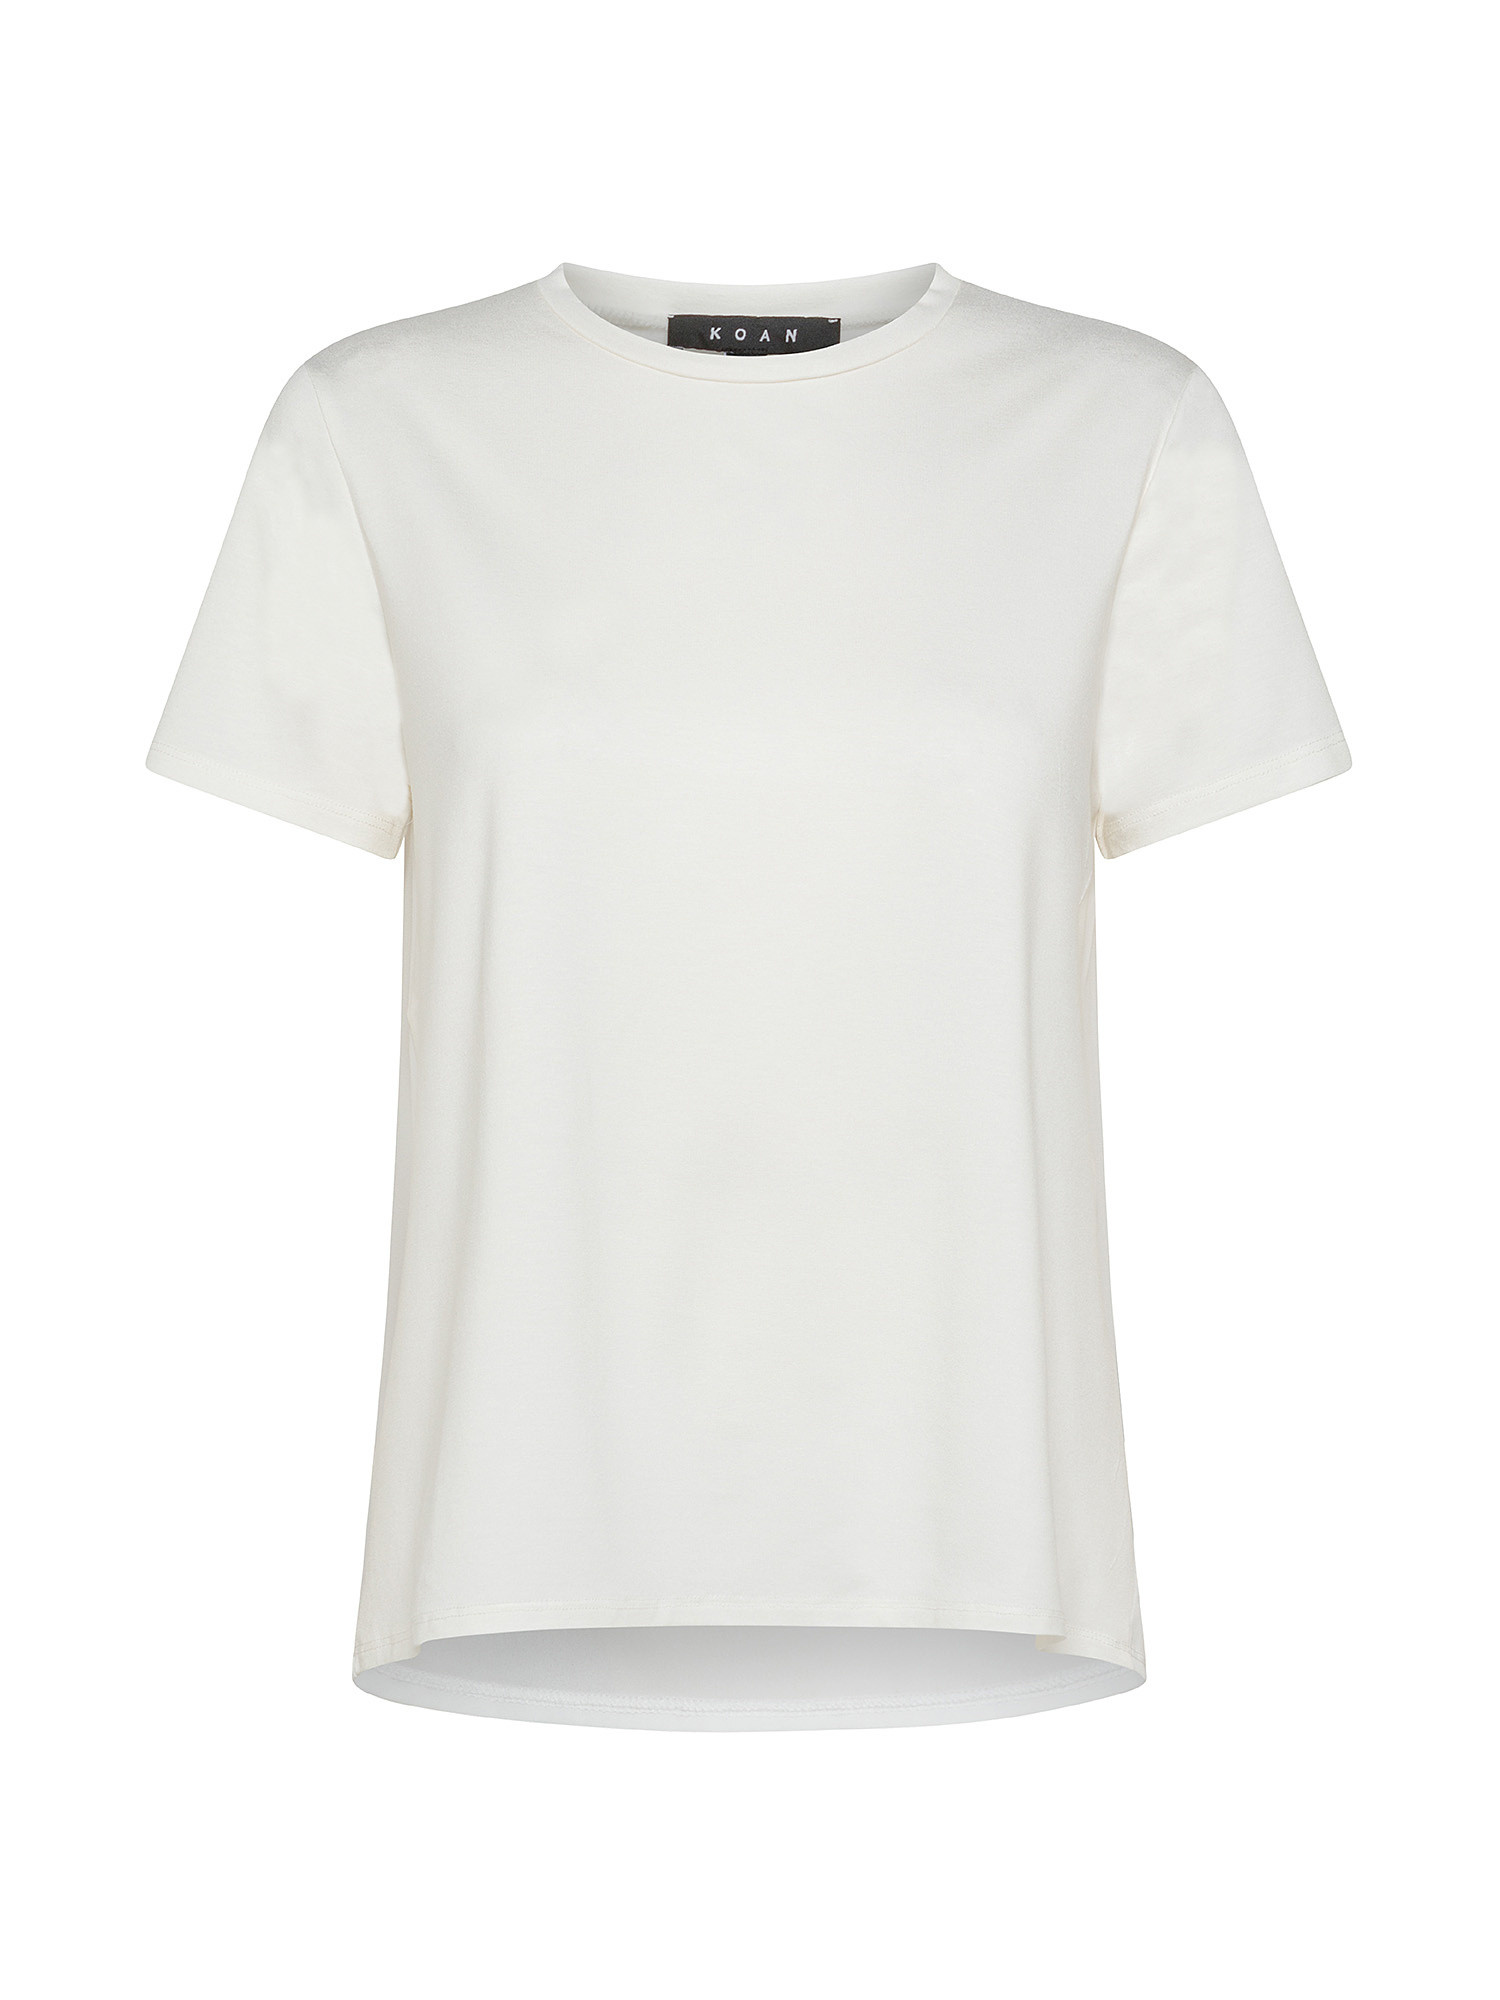 T-shirt with fabric back, White, large image number 0